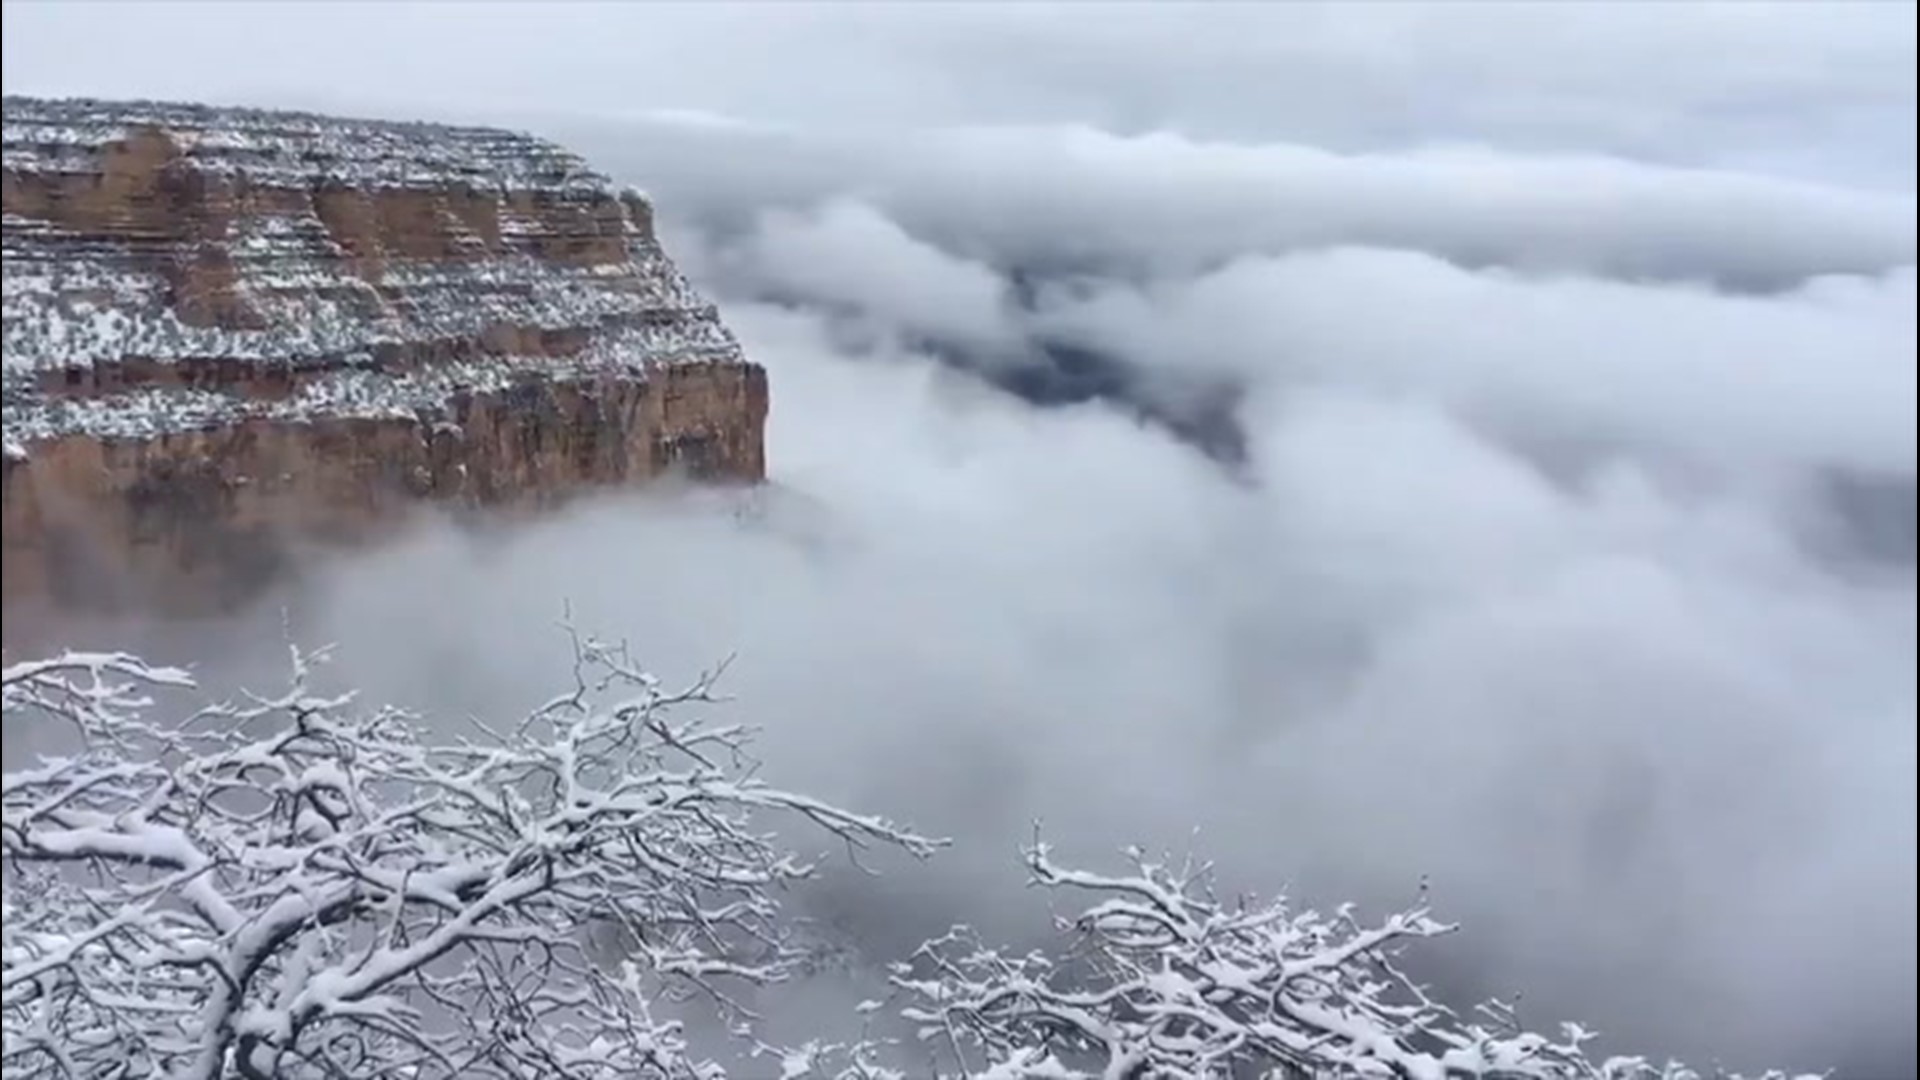 The Grand Canyon was filled with low clouds on Jan. 24 due to a partial cloud inversion, which is when warm air covers cold air, trapping clouds between the canyon walls.